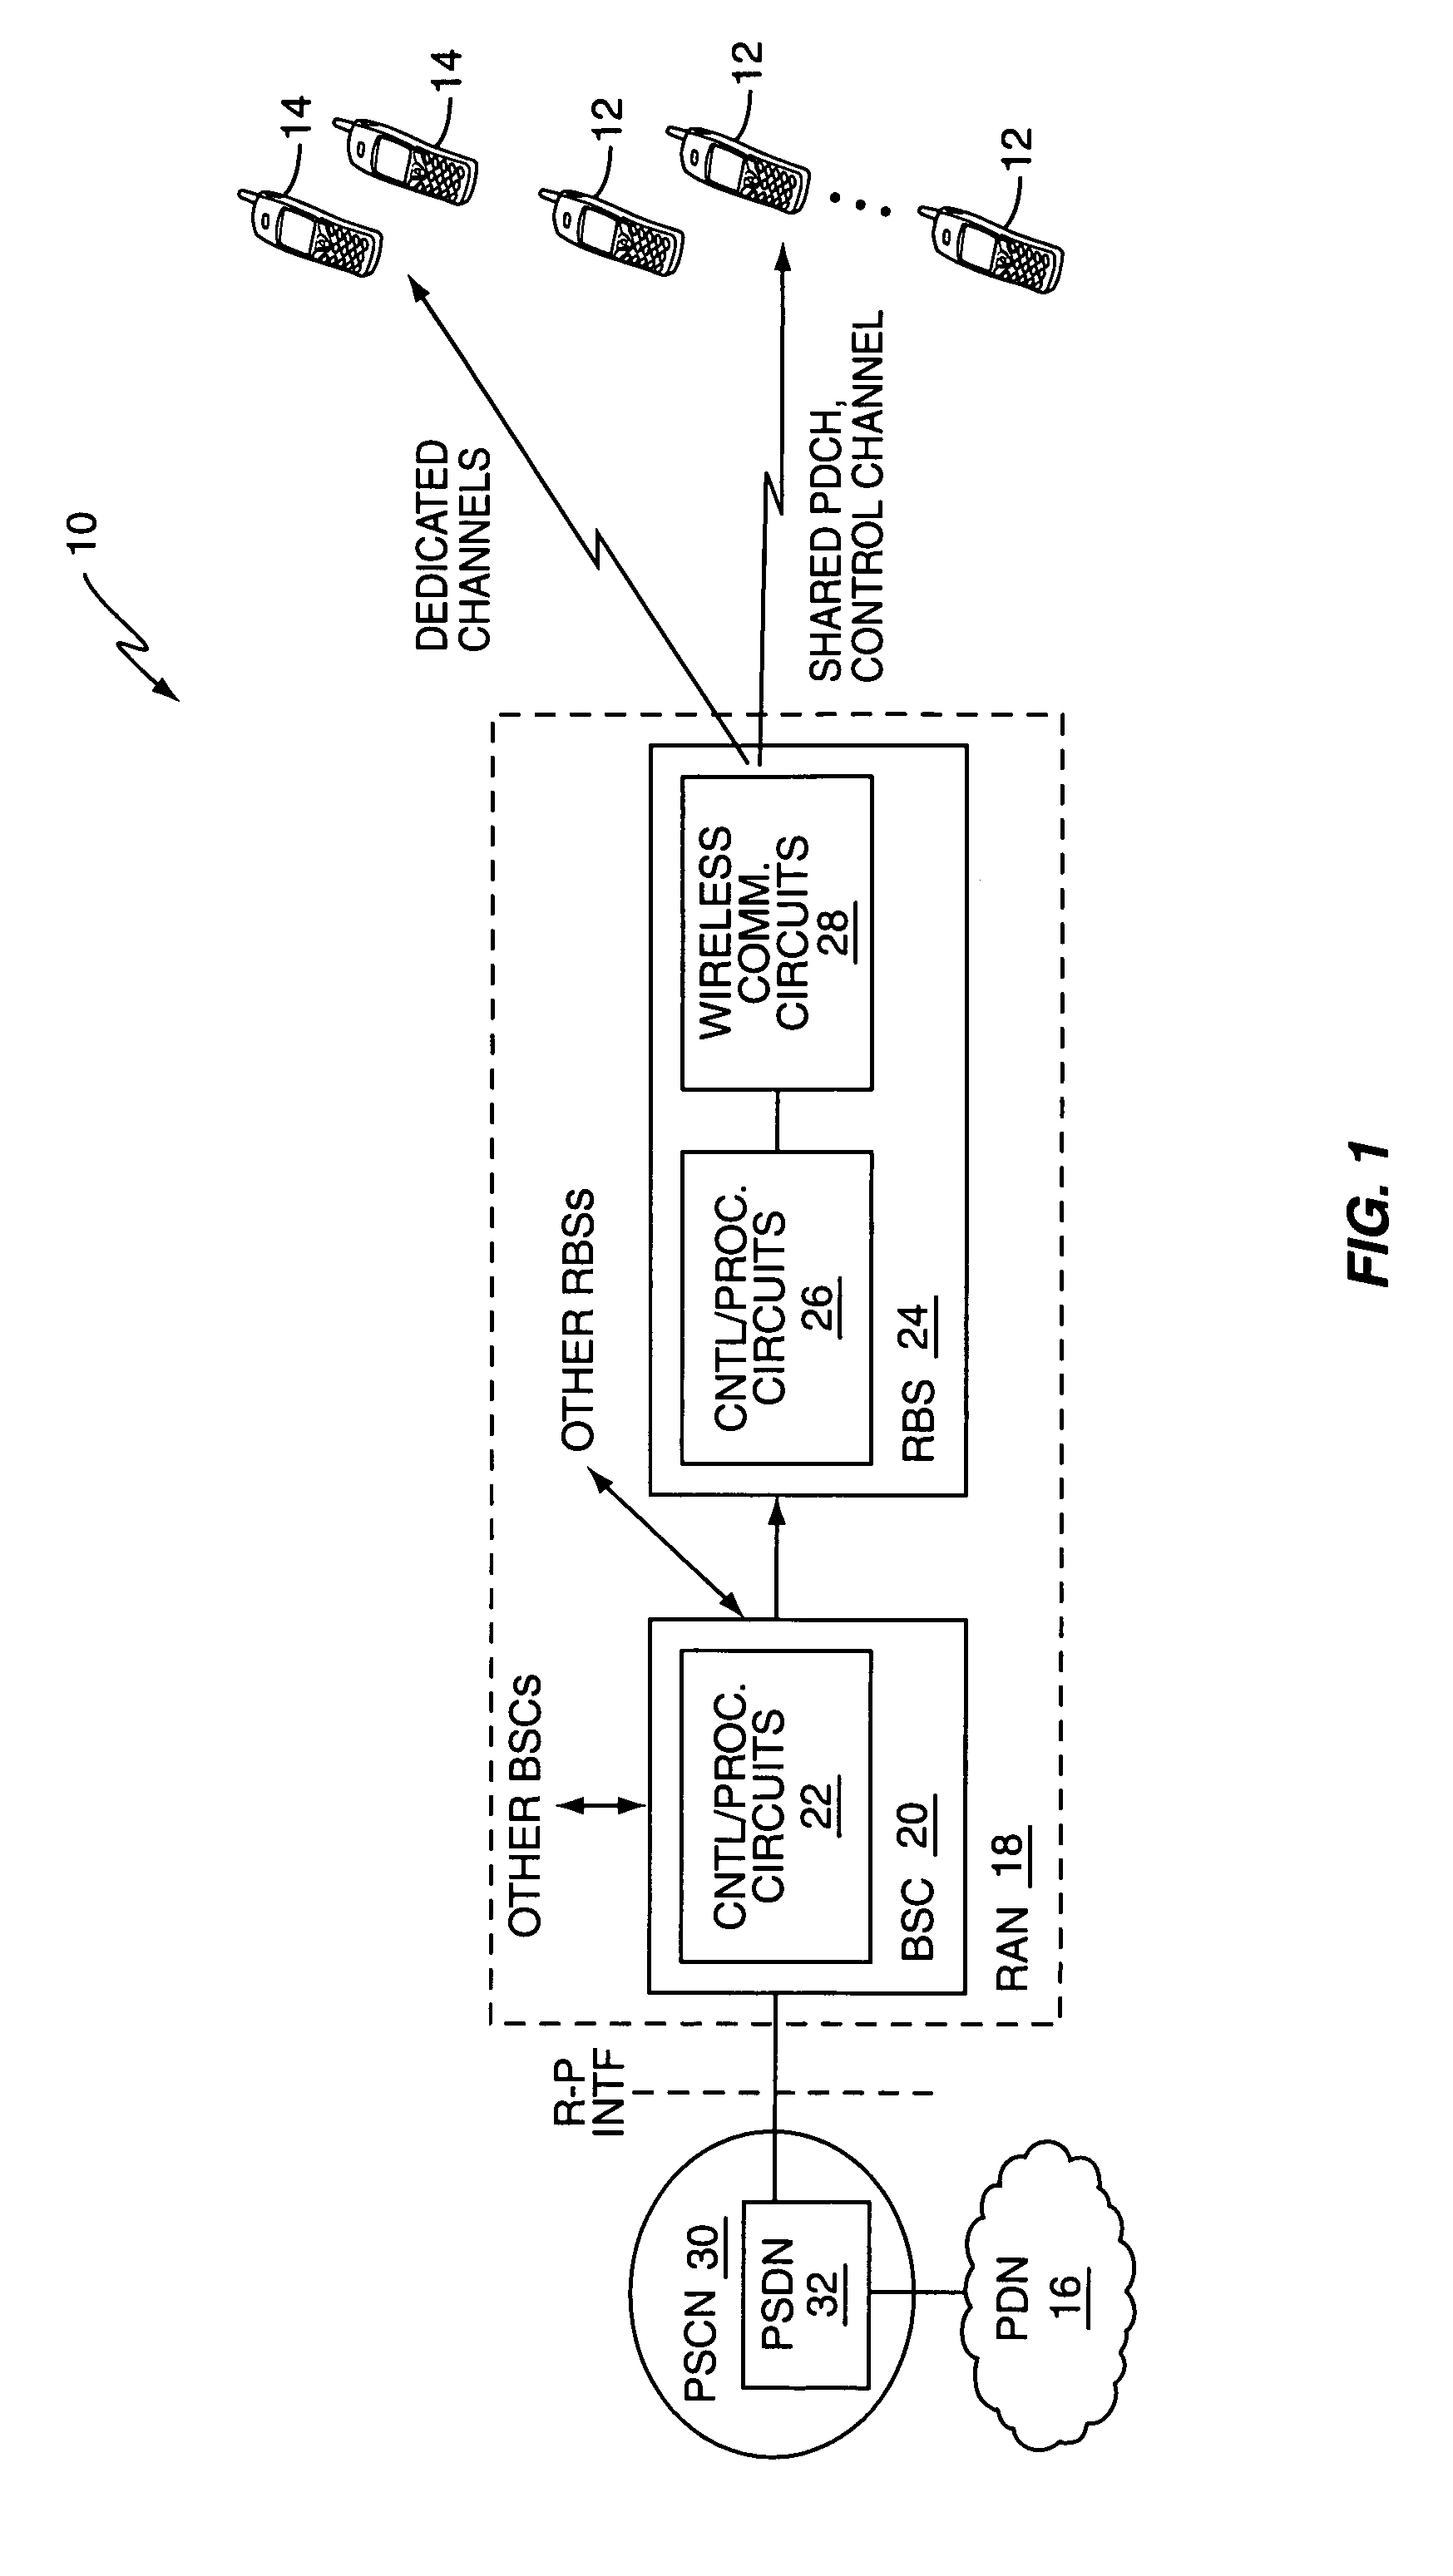 Method and apparatus for broadcasting on a shared packet data channel in a wireless communication network